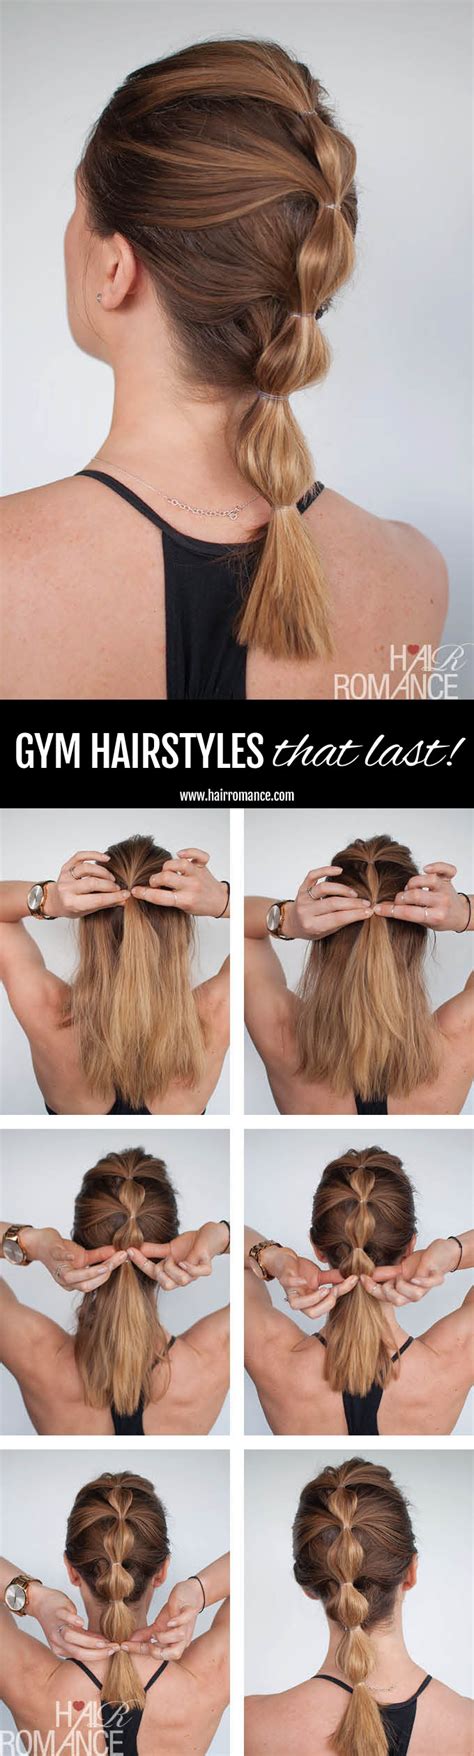 How To Look Good While You Workout 3 Long Lasting Hairstyle Tutorials